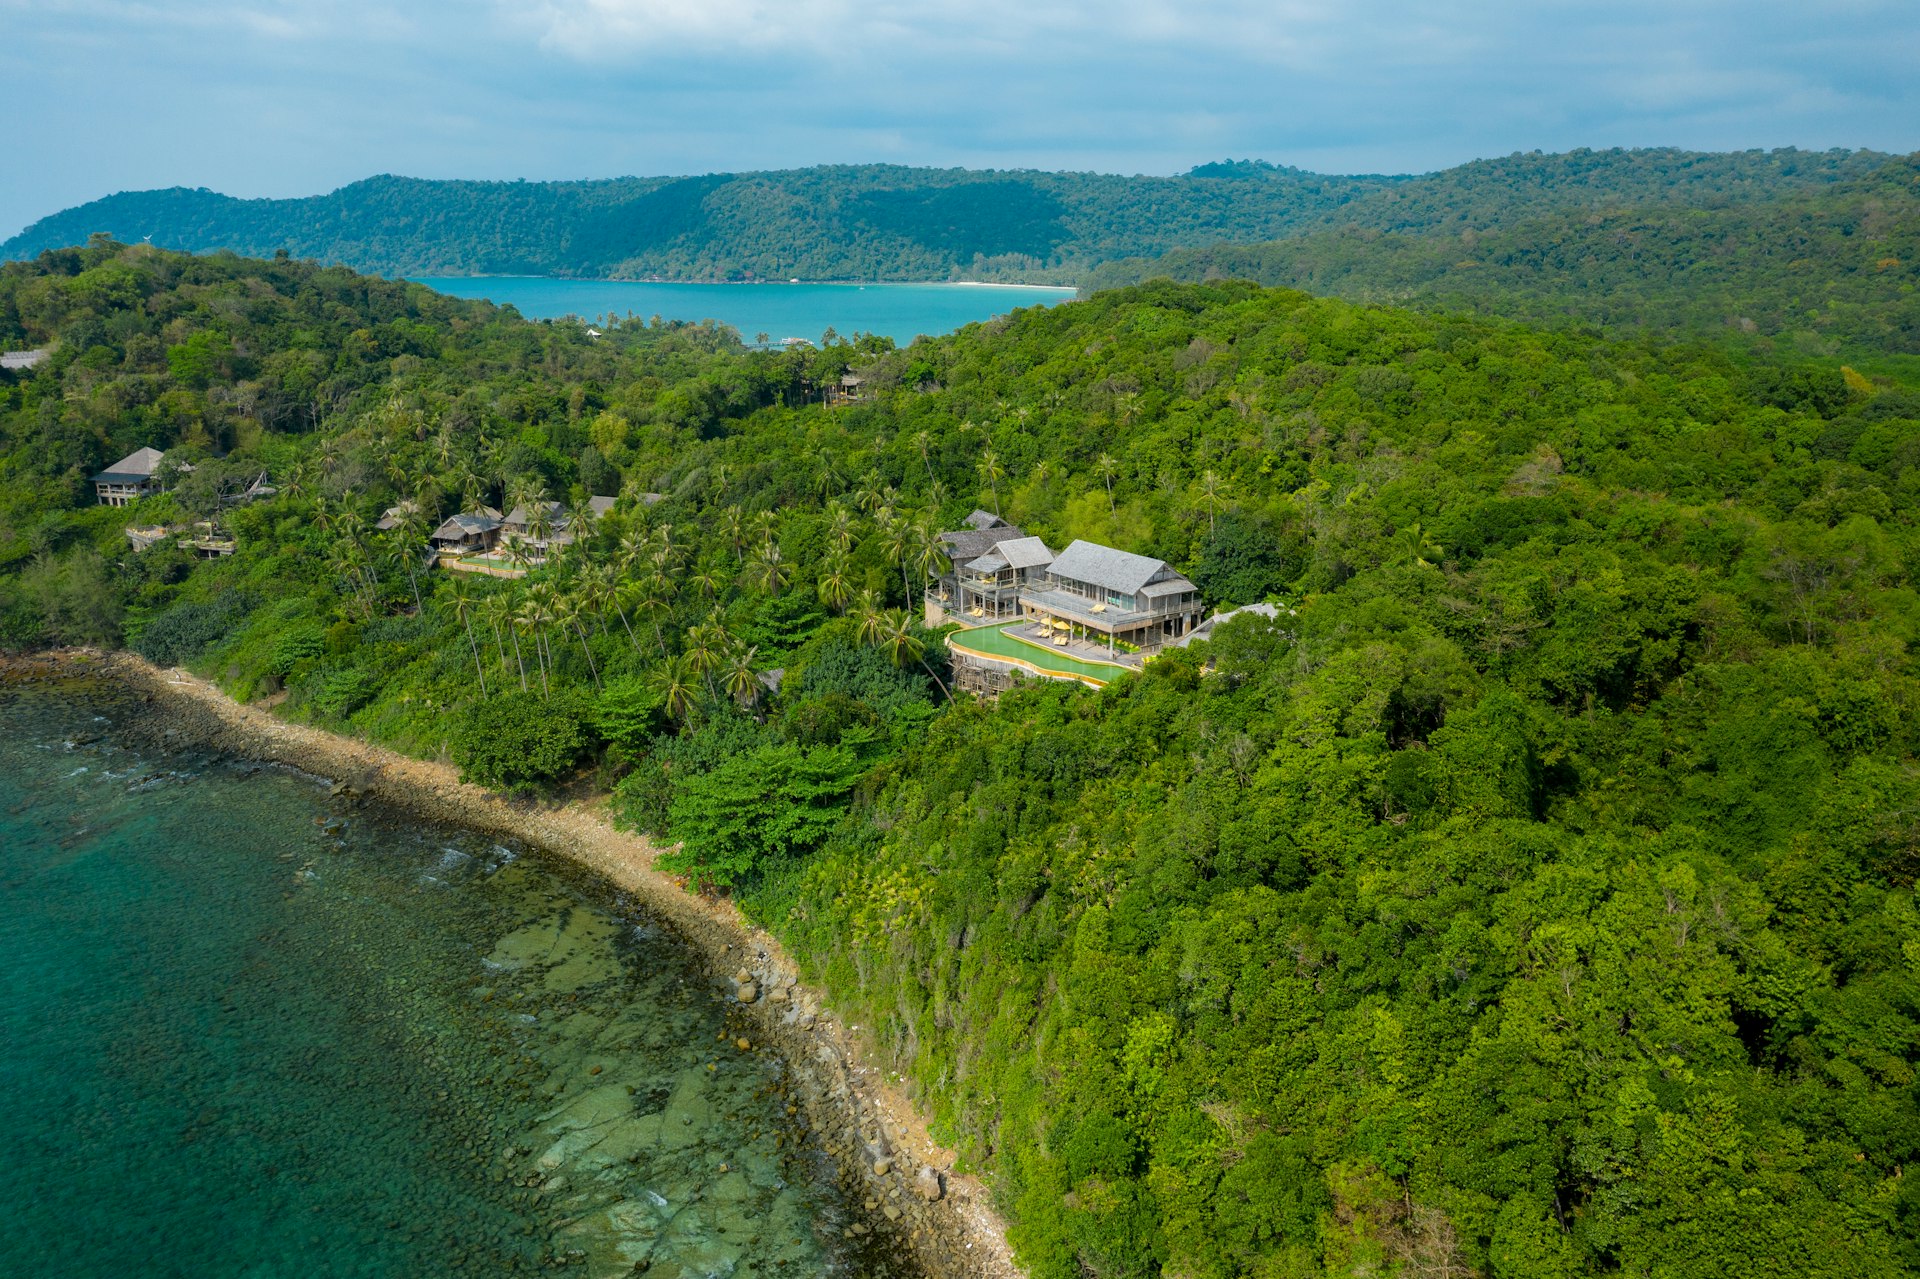 An aerial shot of a wooden lodge built on a peninsula surrounded by lush jungle